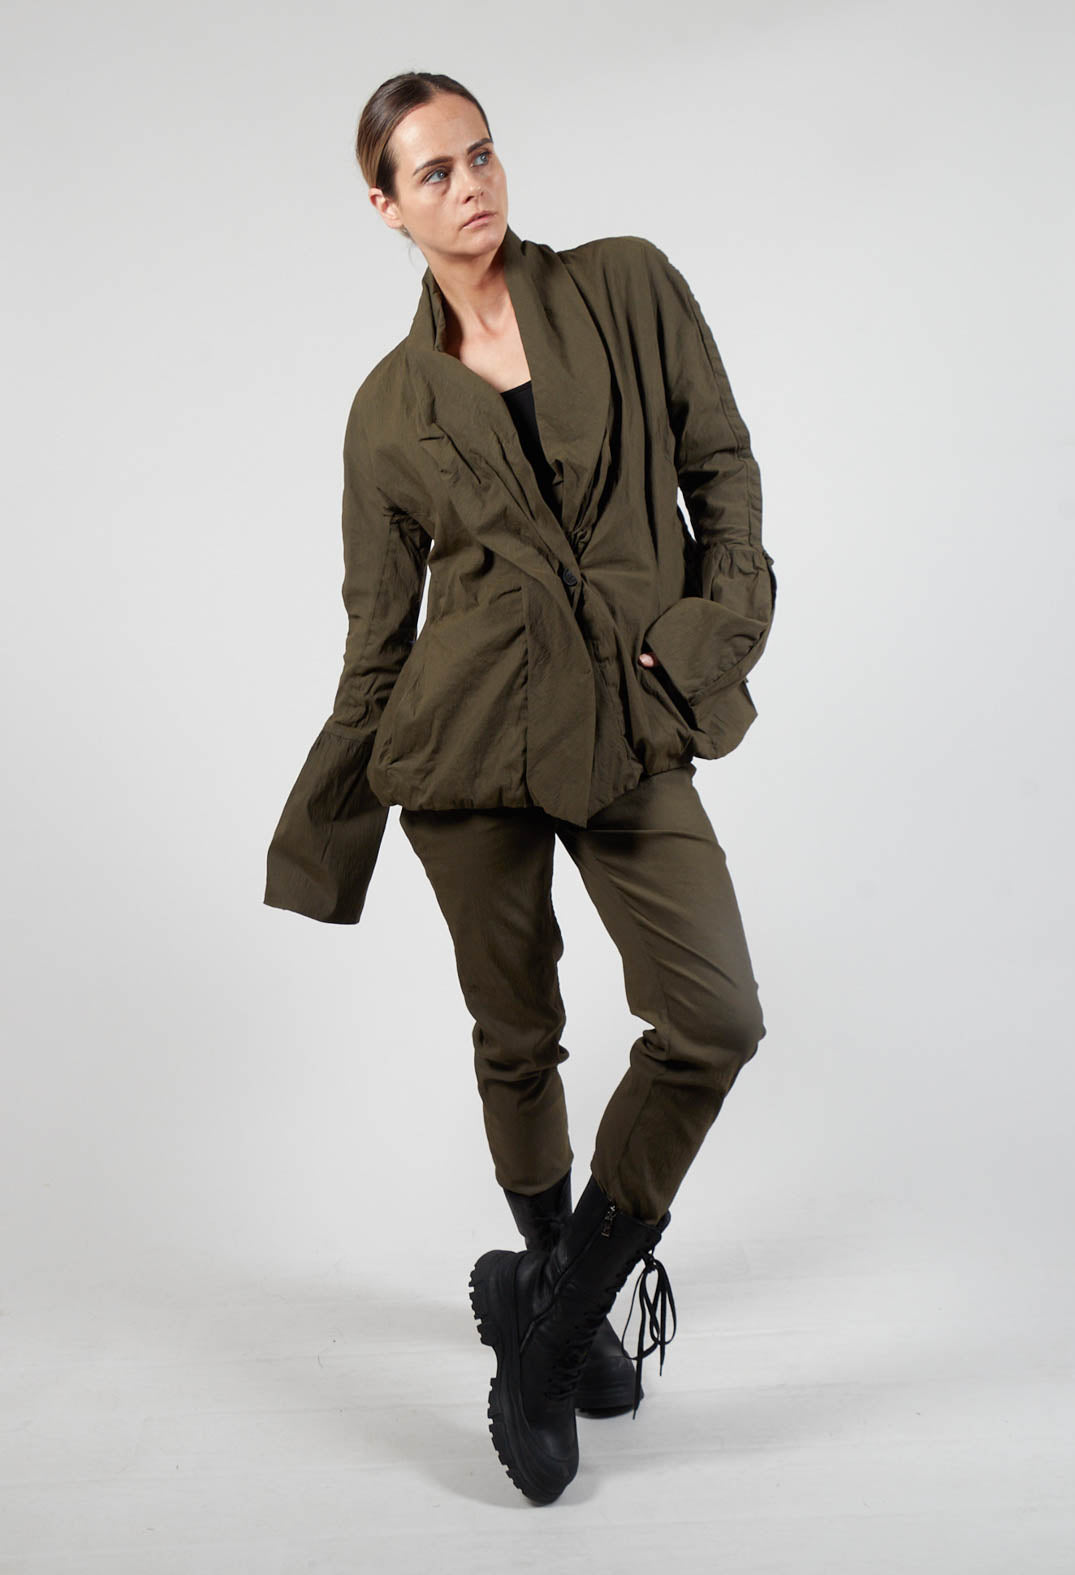 Ruched Fabric Collar Jacket With Statement Sleeves in Khaki